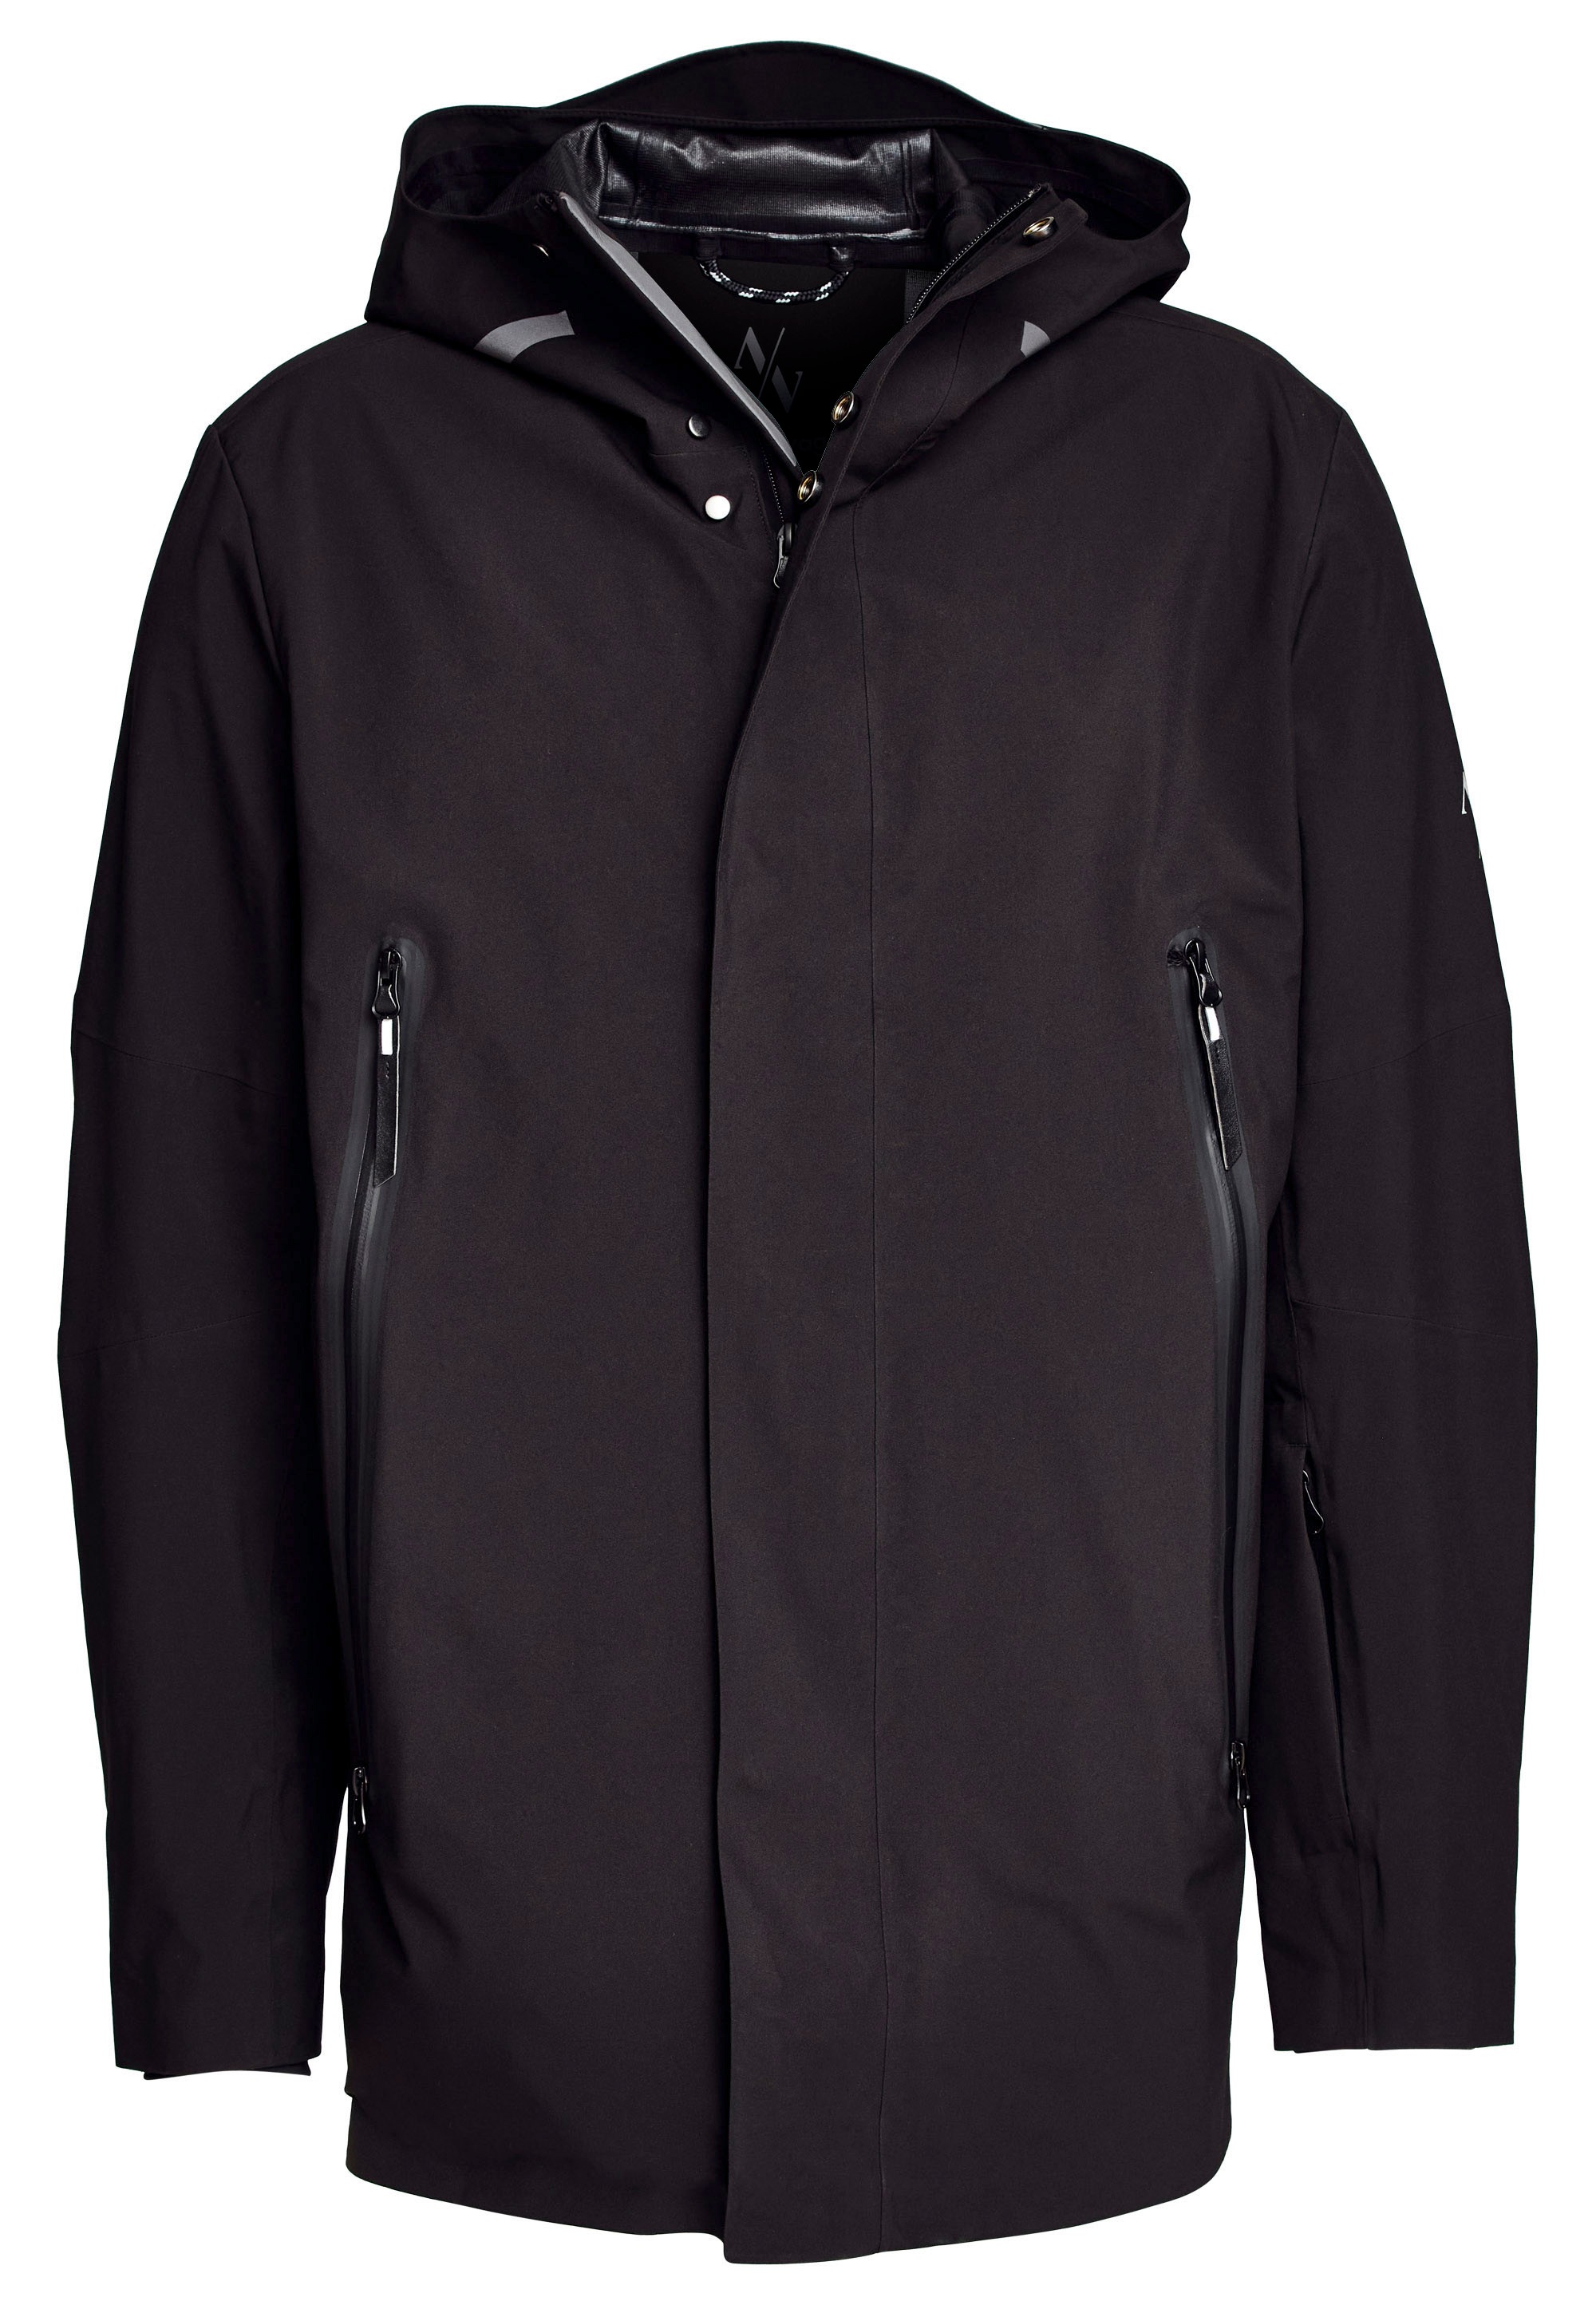 New Canadian Outdoorjacke »Alpha Voyager«, aus recyceltem Material